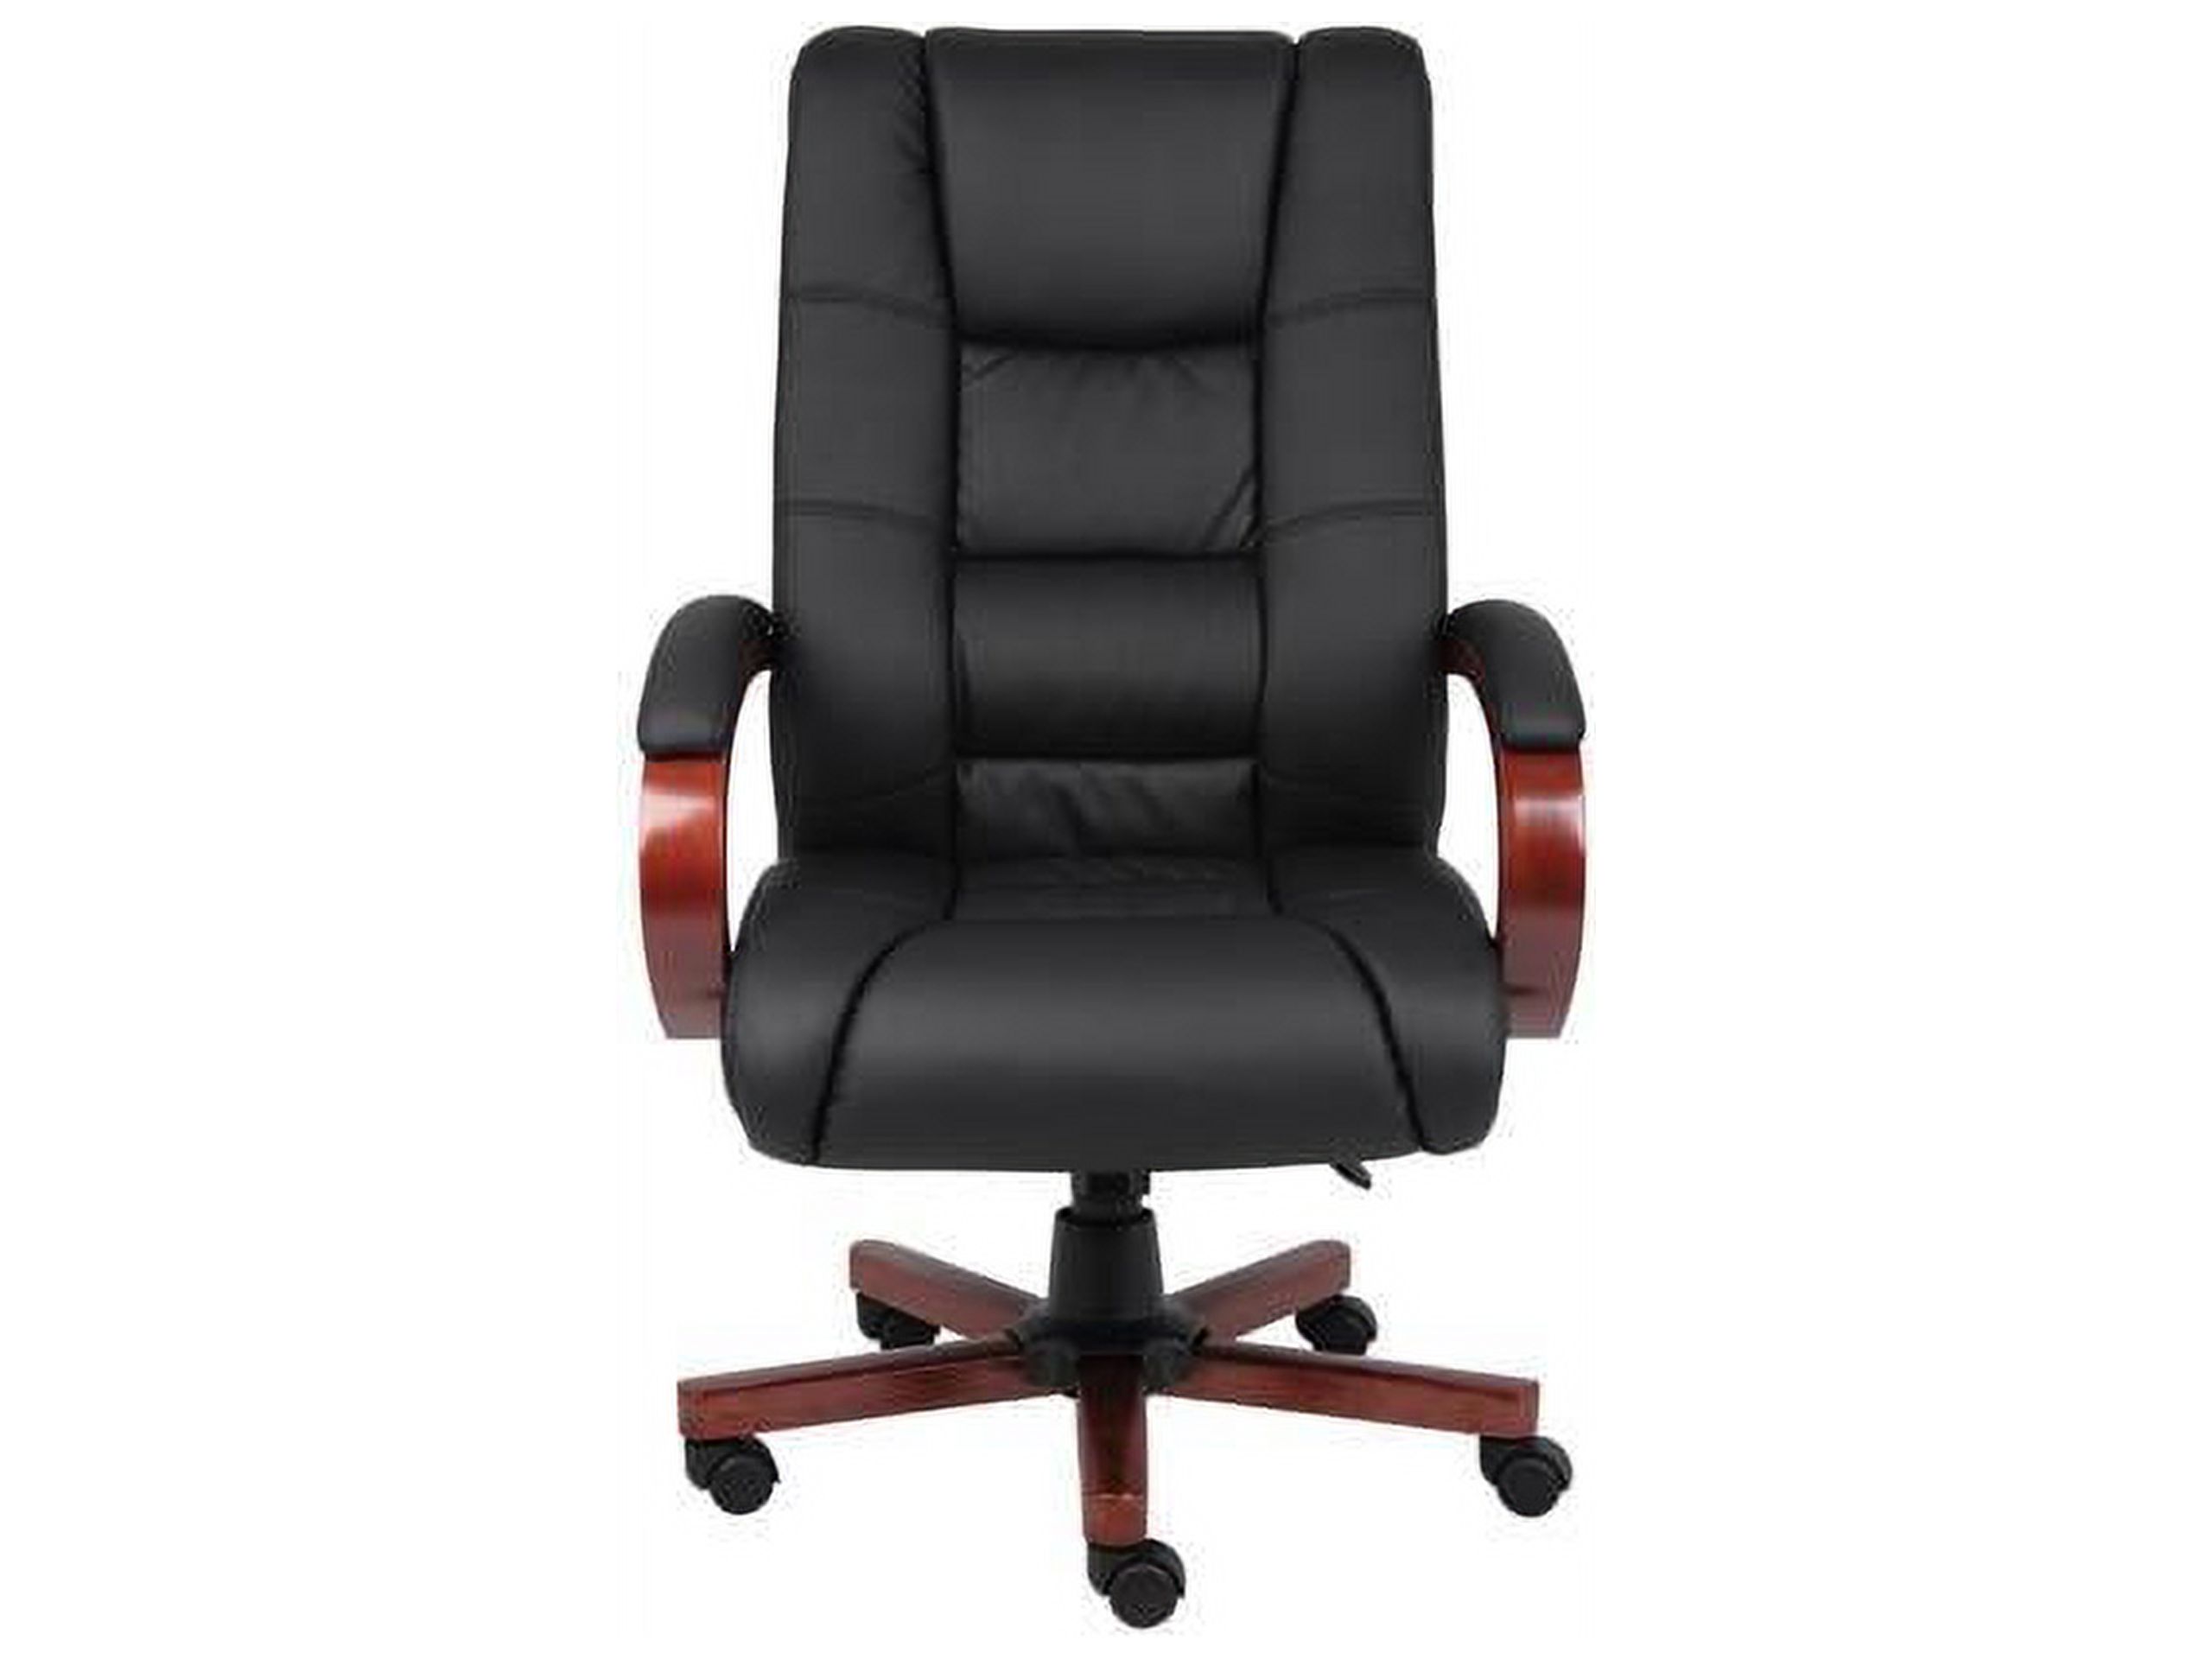 BOSS Office Products B8991-C Executive Chairs - image 3 of 5